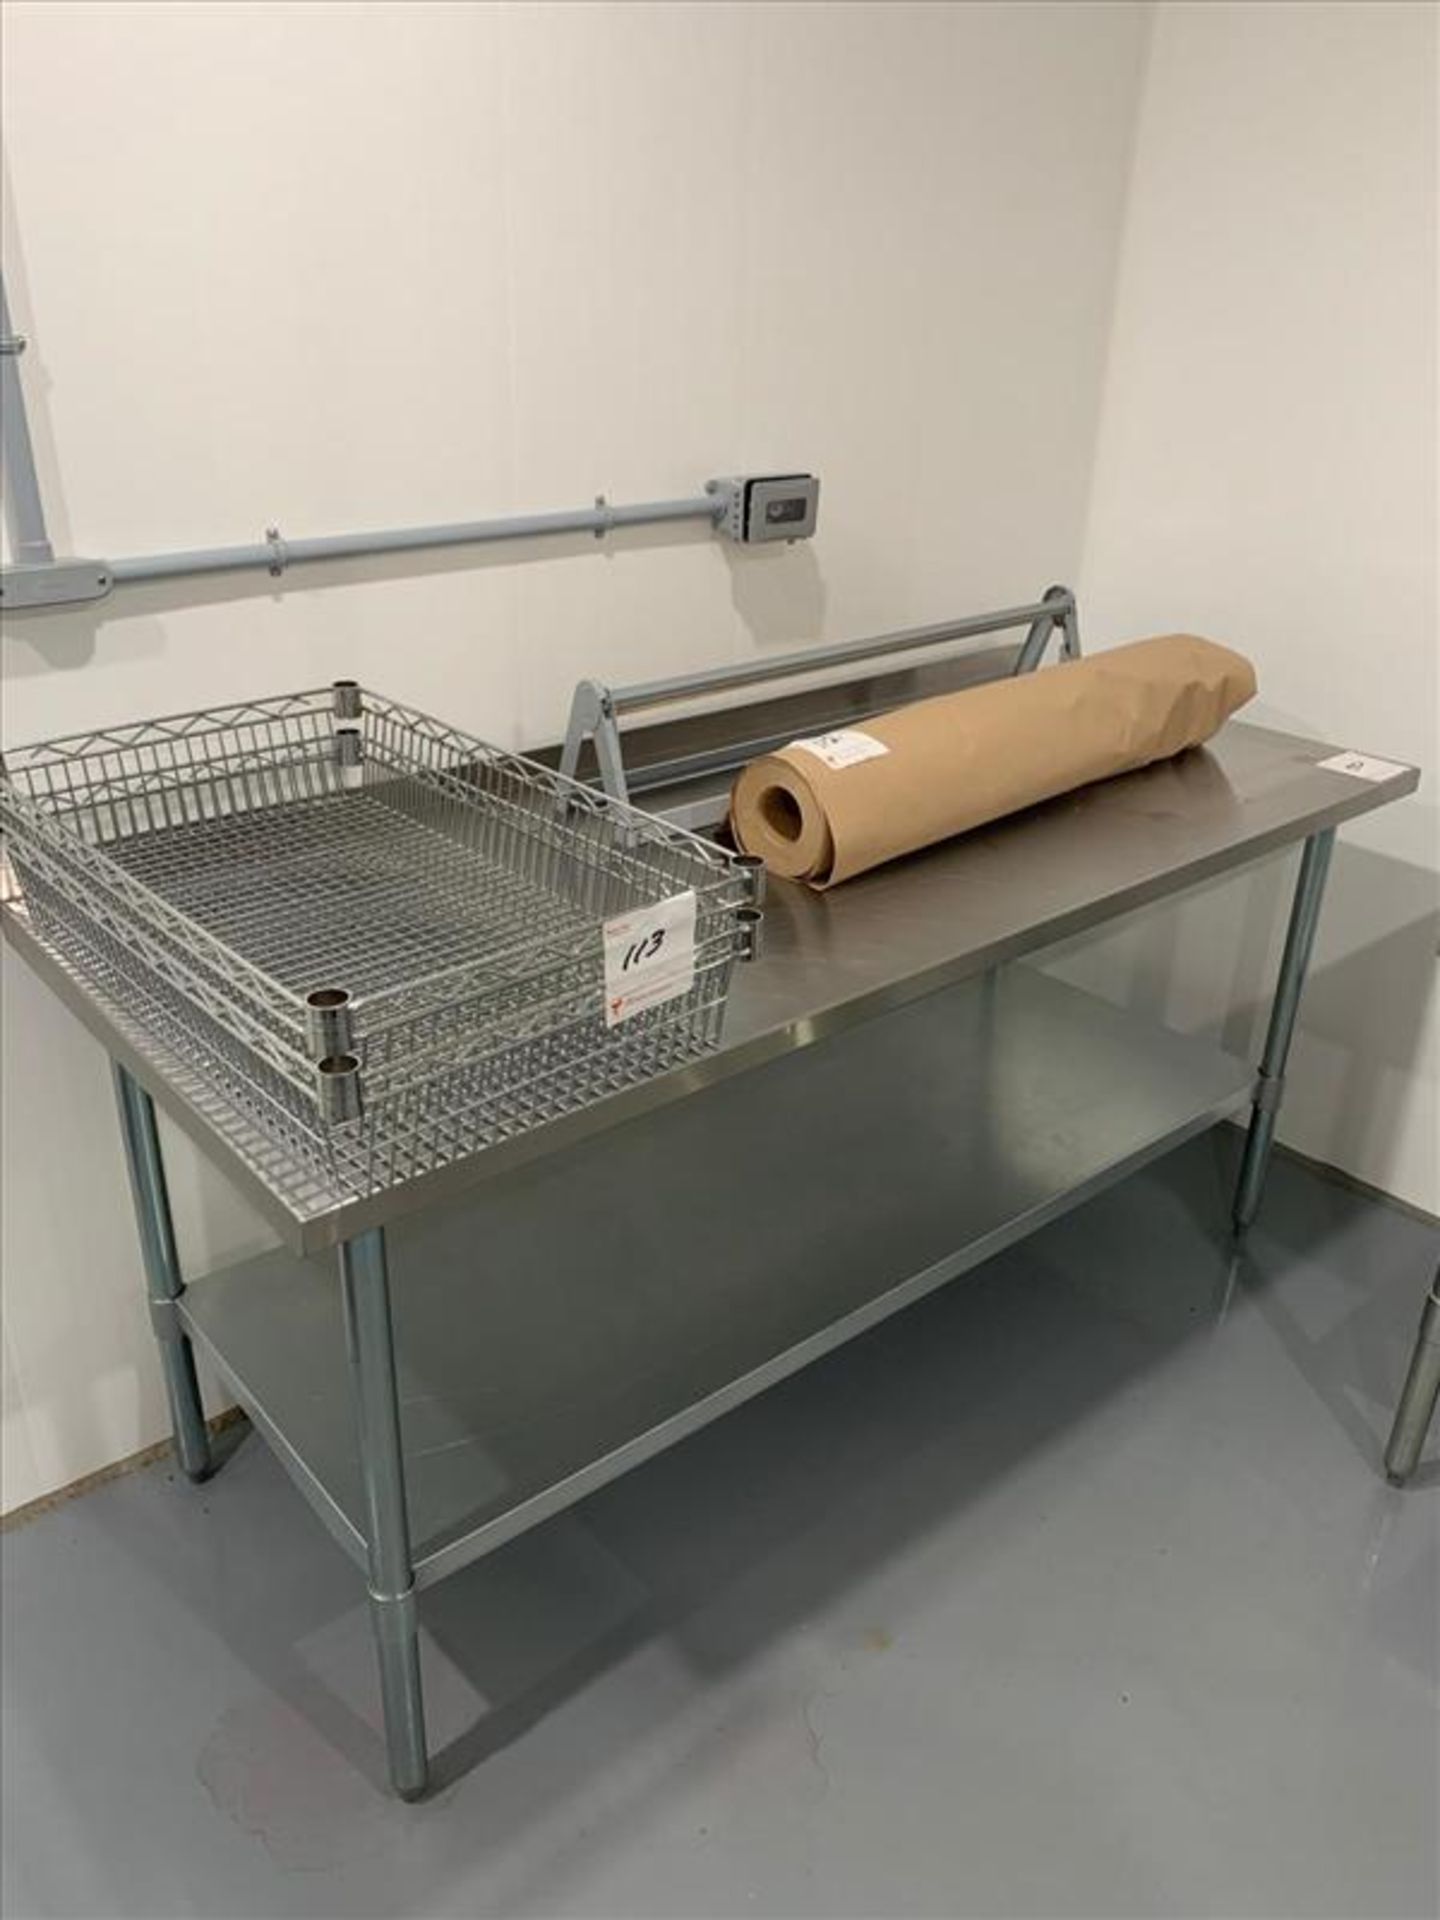 Stainless Steel Table, approx. 30 in. x 72 in. (excluding contents)